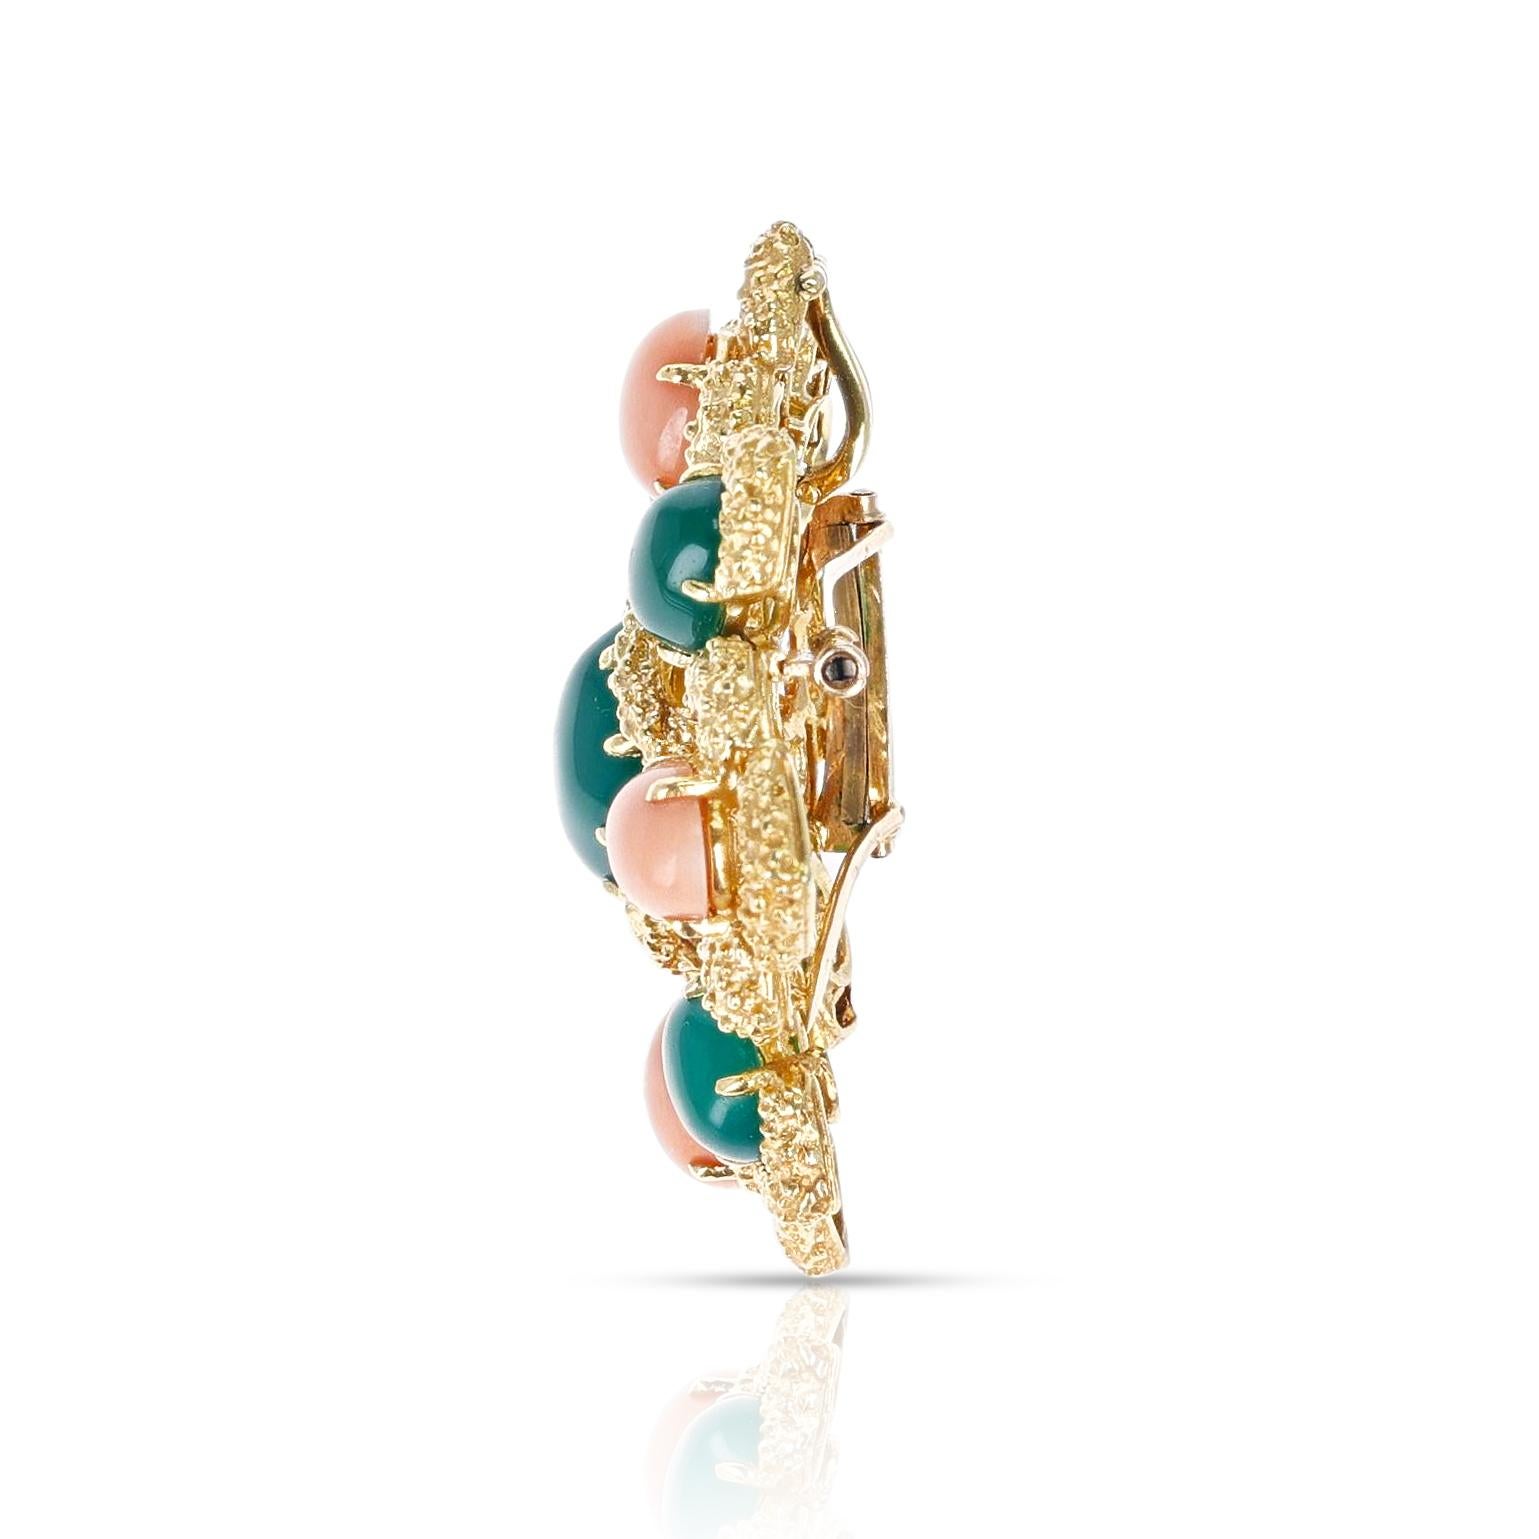 Van Cleef & Arpels Chrysoprase and Coral Cabochon Brooch, 18K Yellow Gold In Excellent Condition For Sale In New York, NY